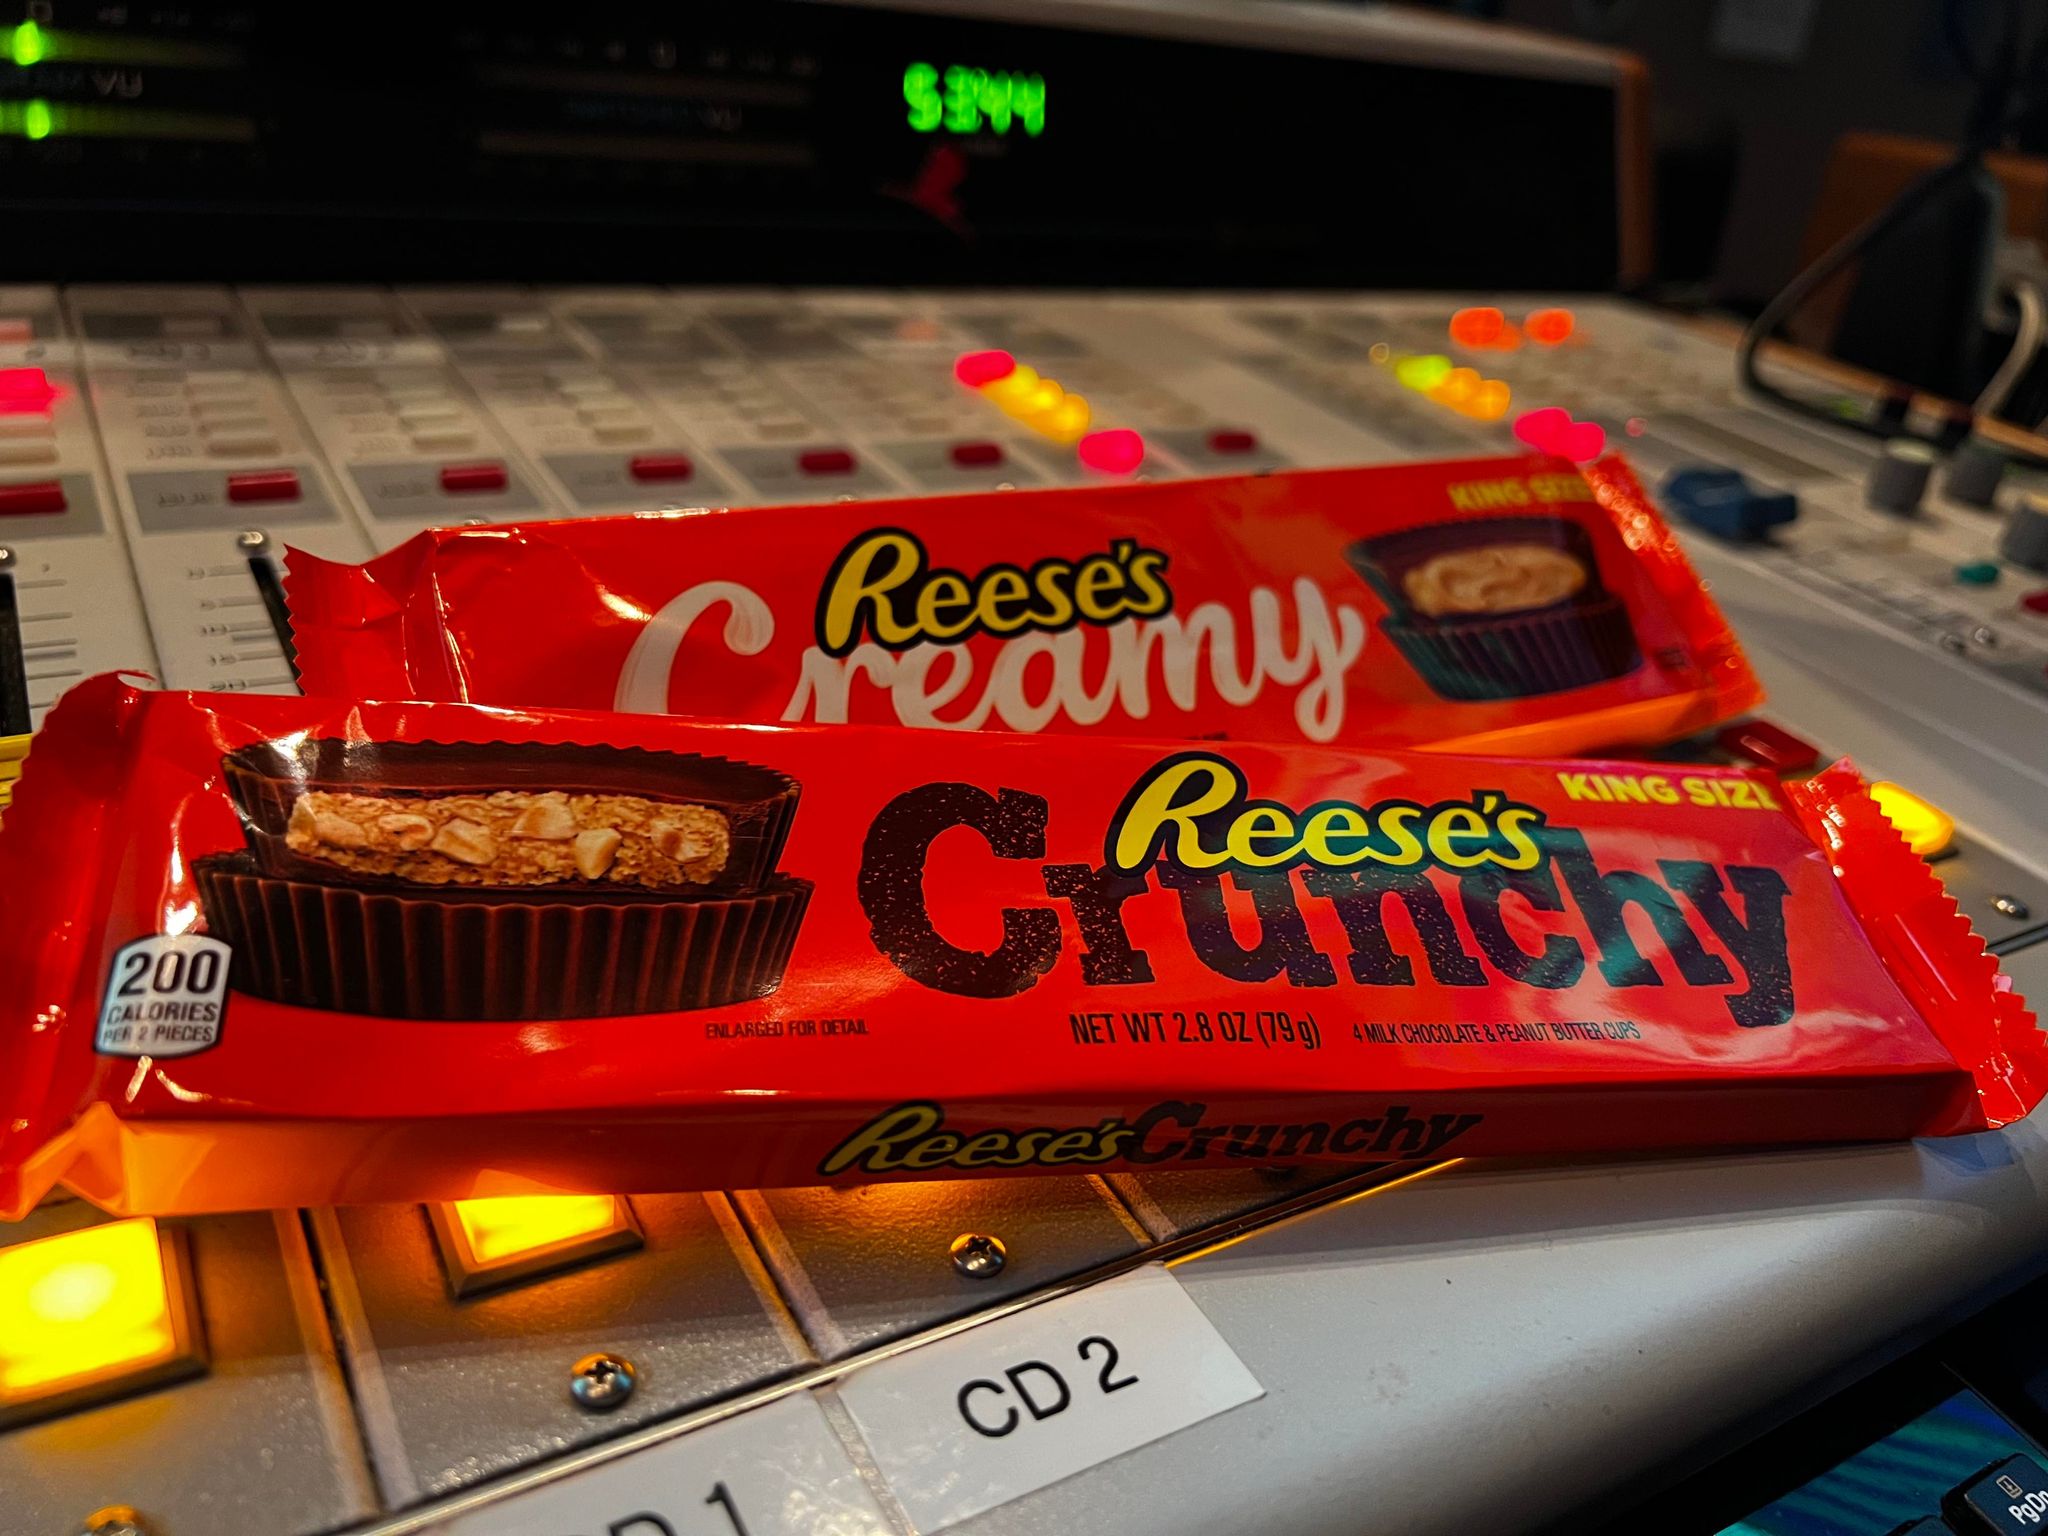 I Tried the NEW Reese’s Peanut Butter Cup! It’s Crunchy! [Video]